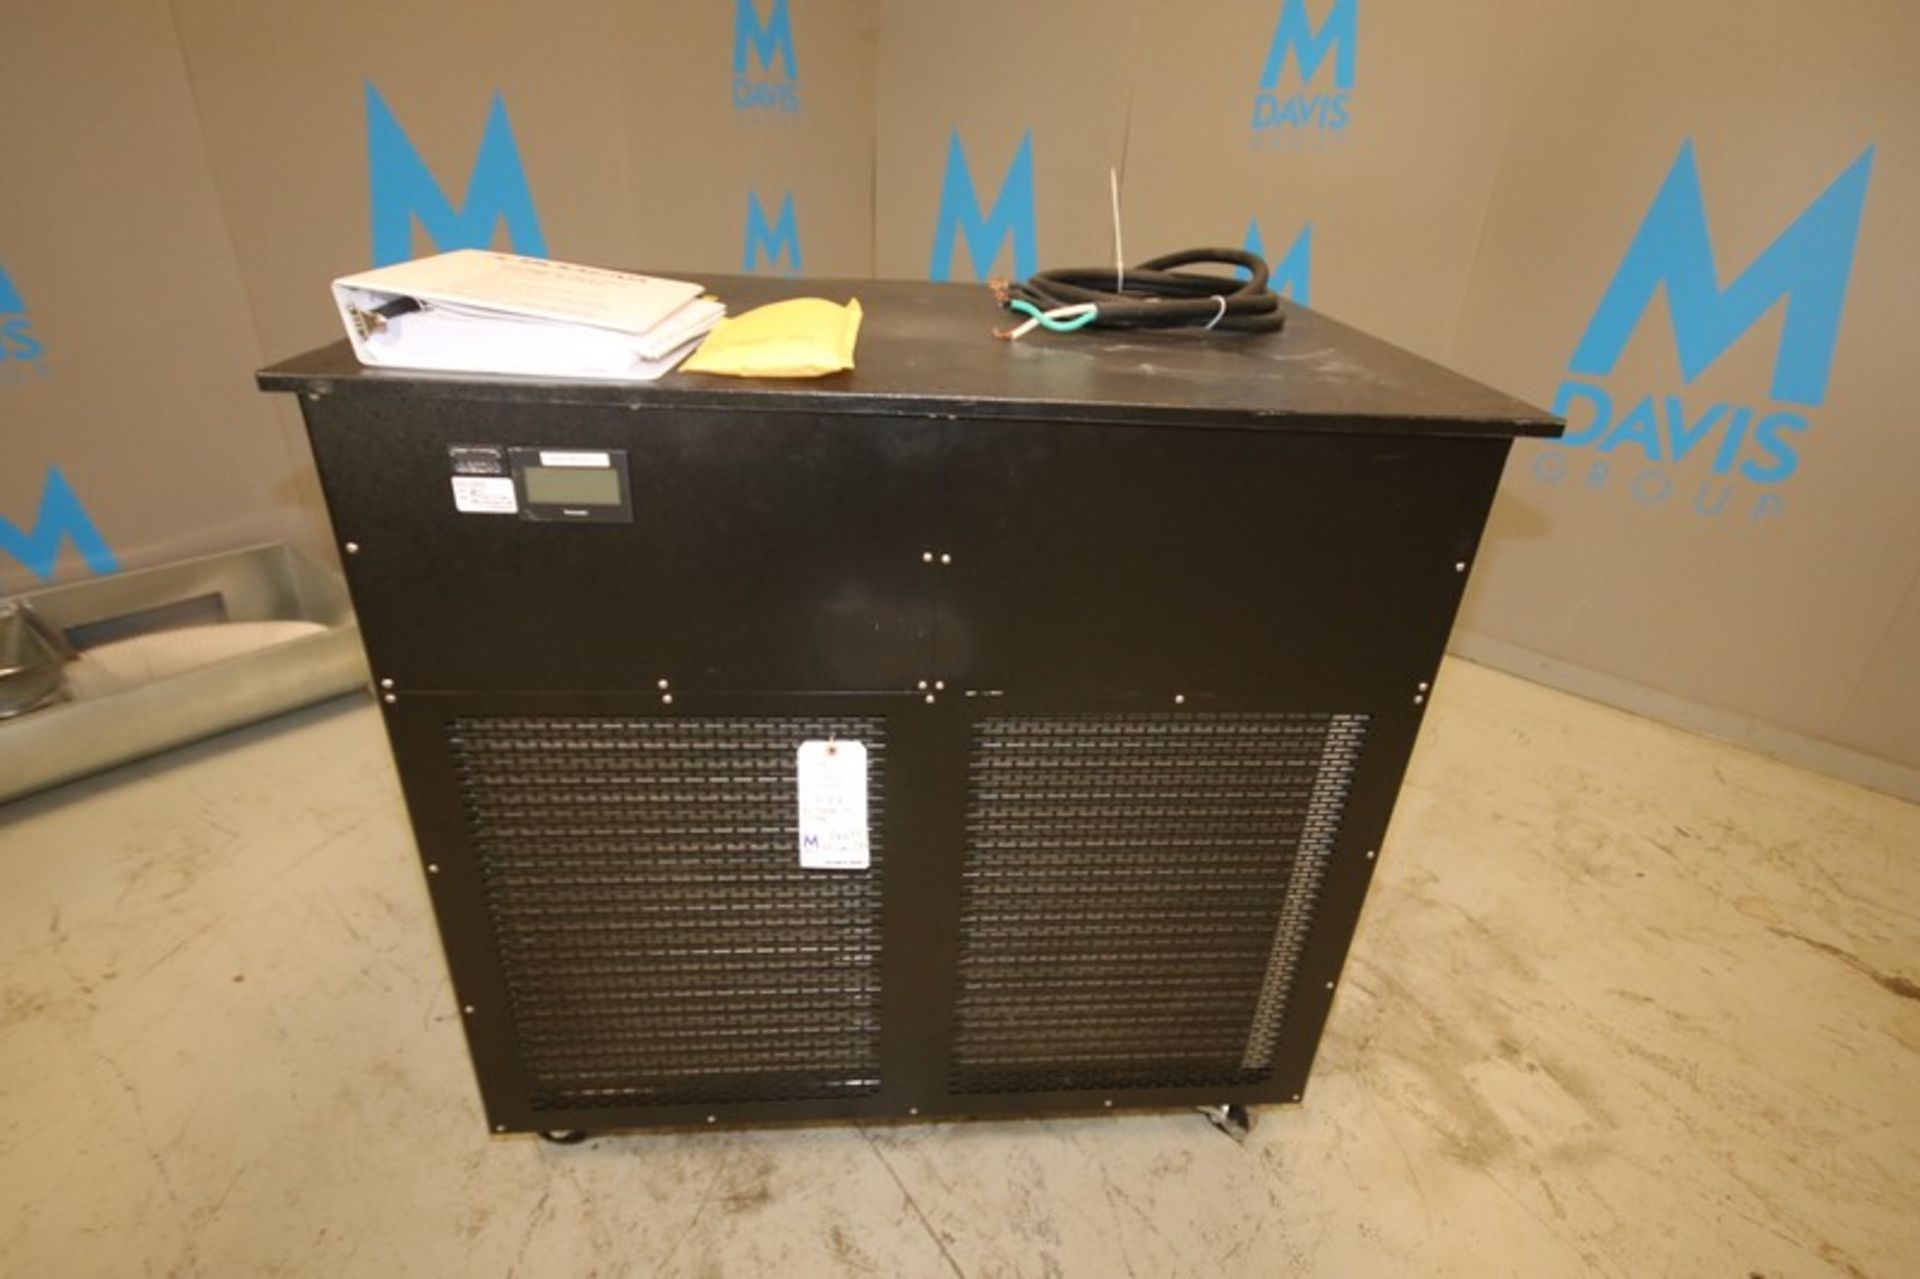 2018 BV Thermal Systems Re Circulating Chiller, Model #MC-400-C2-E1, SN 2018404-33537, 208-230V, 1 - Image 2 of 8